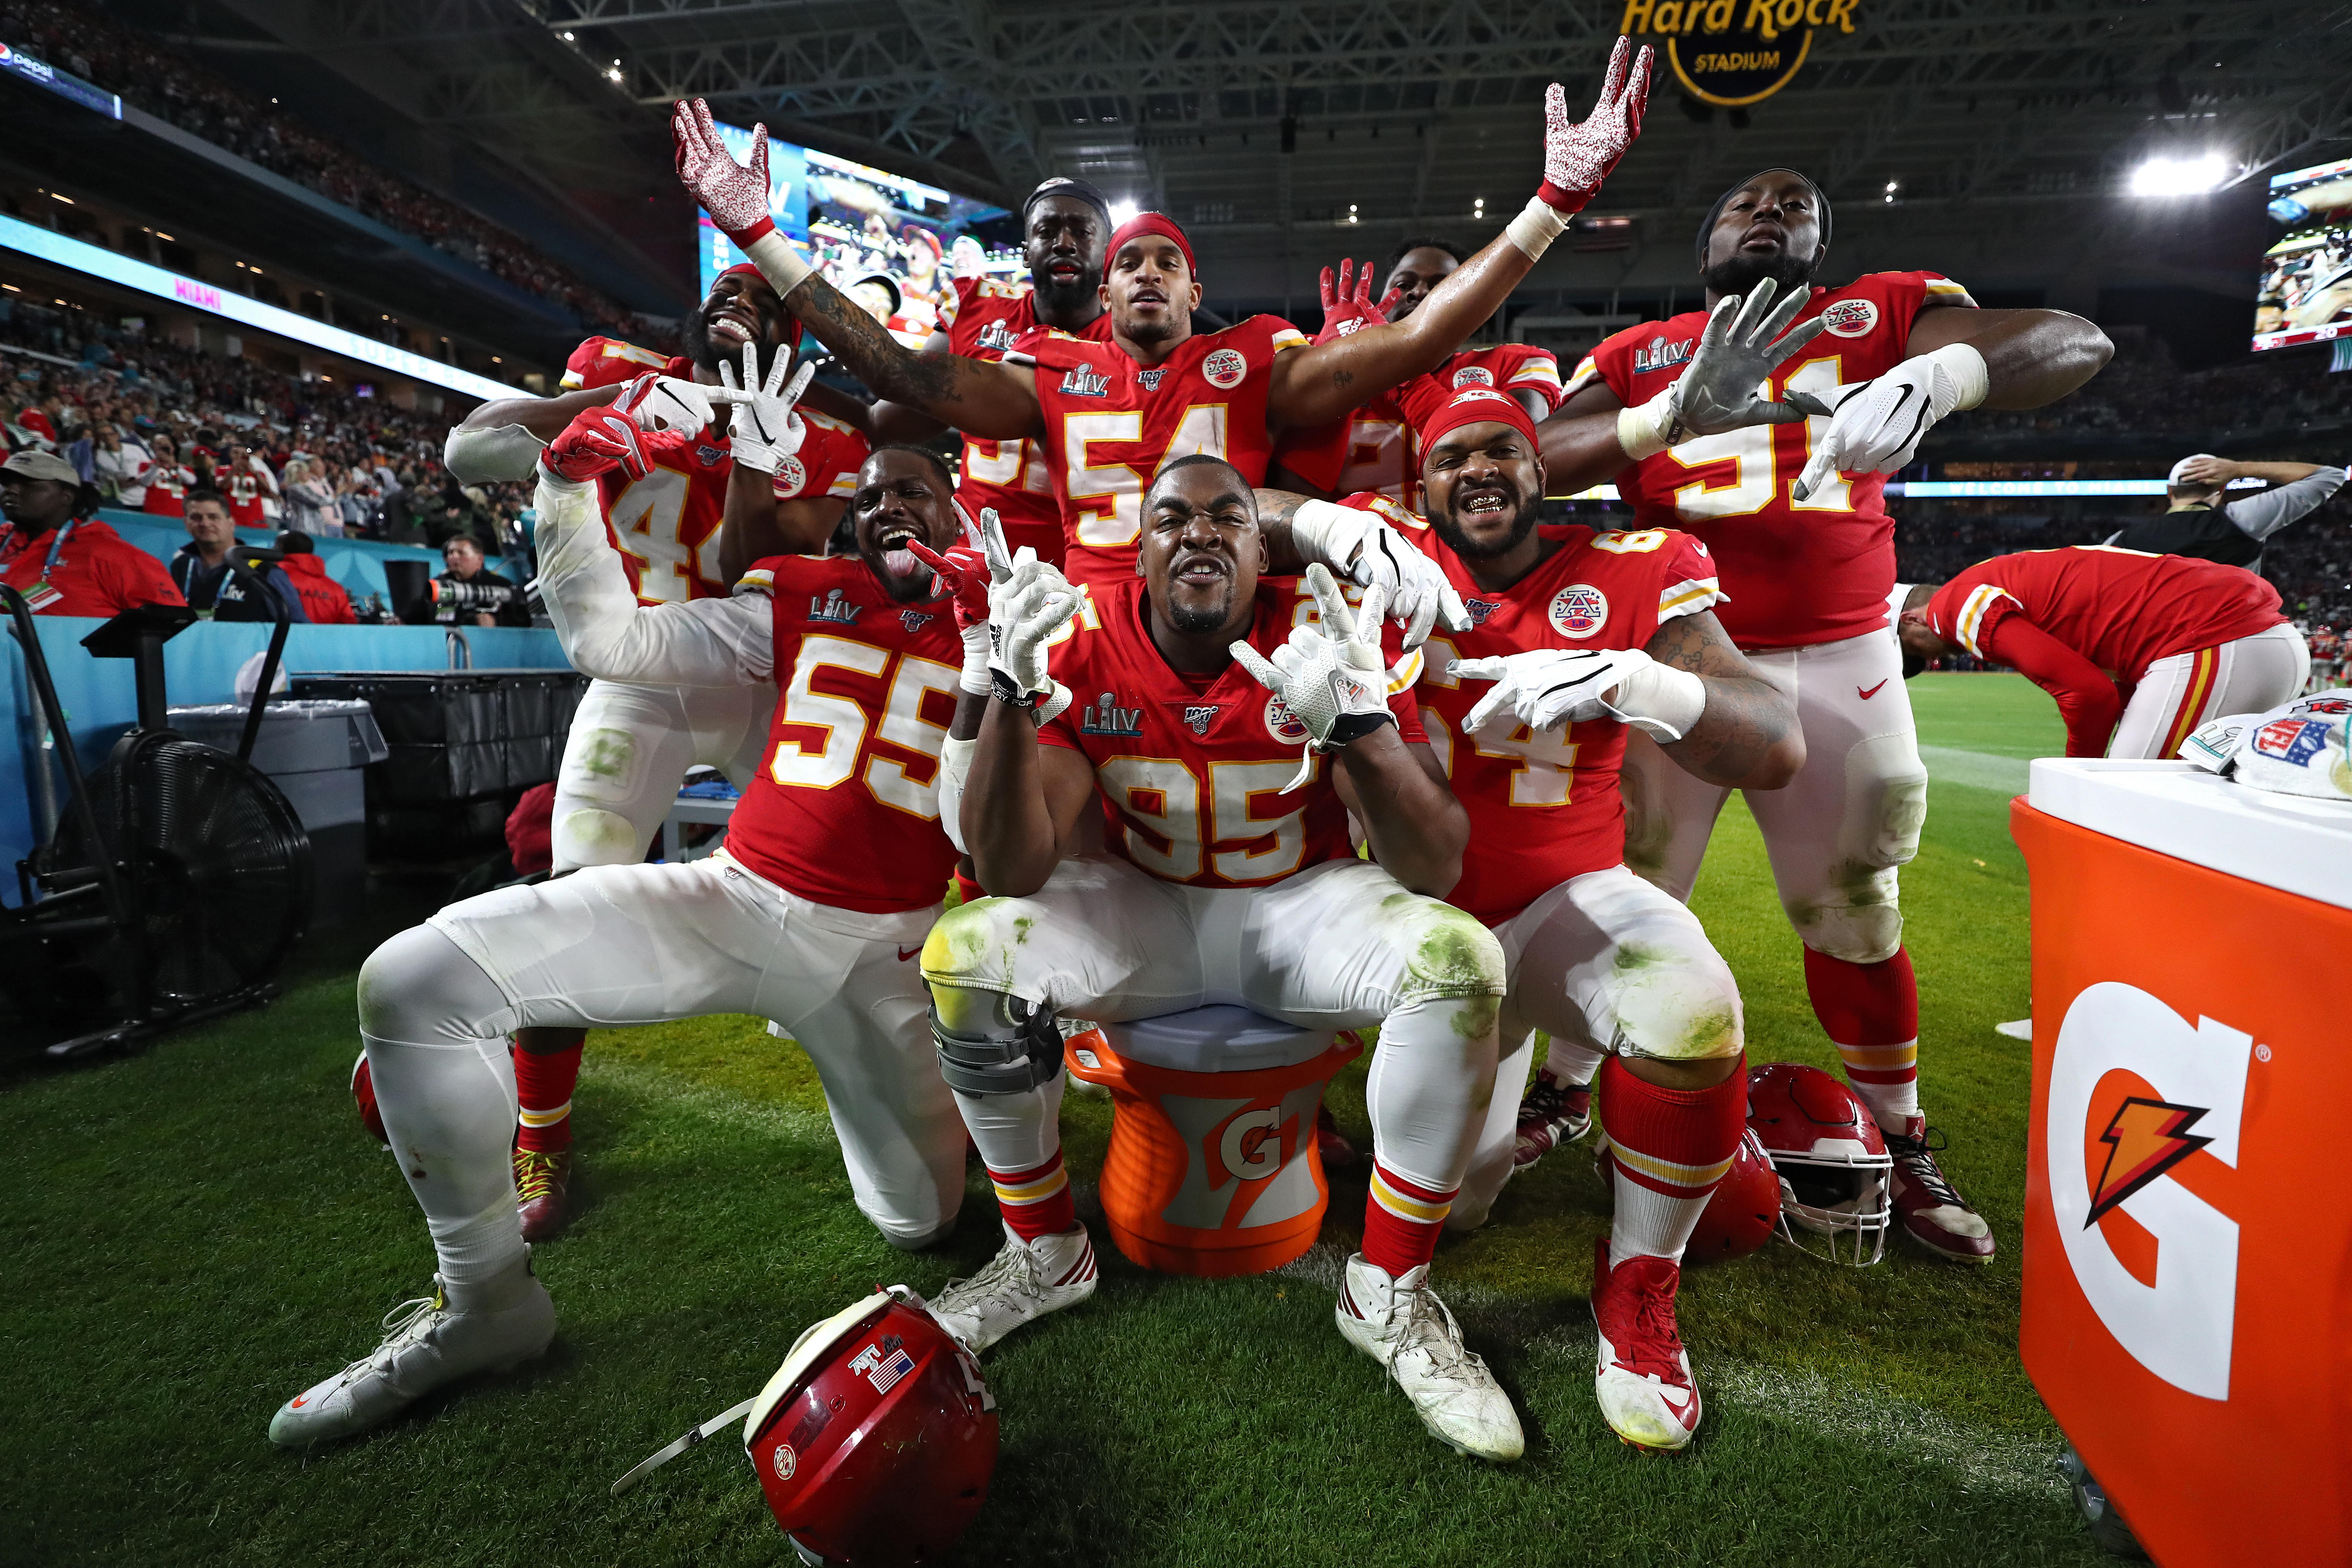 Kansas City Chiefs Super Bowl : The 49ers will hope to add to their five super bowl titles after